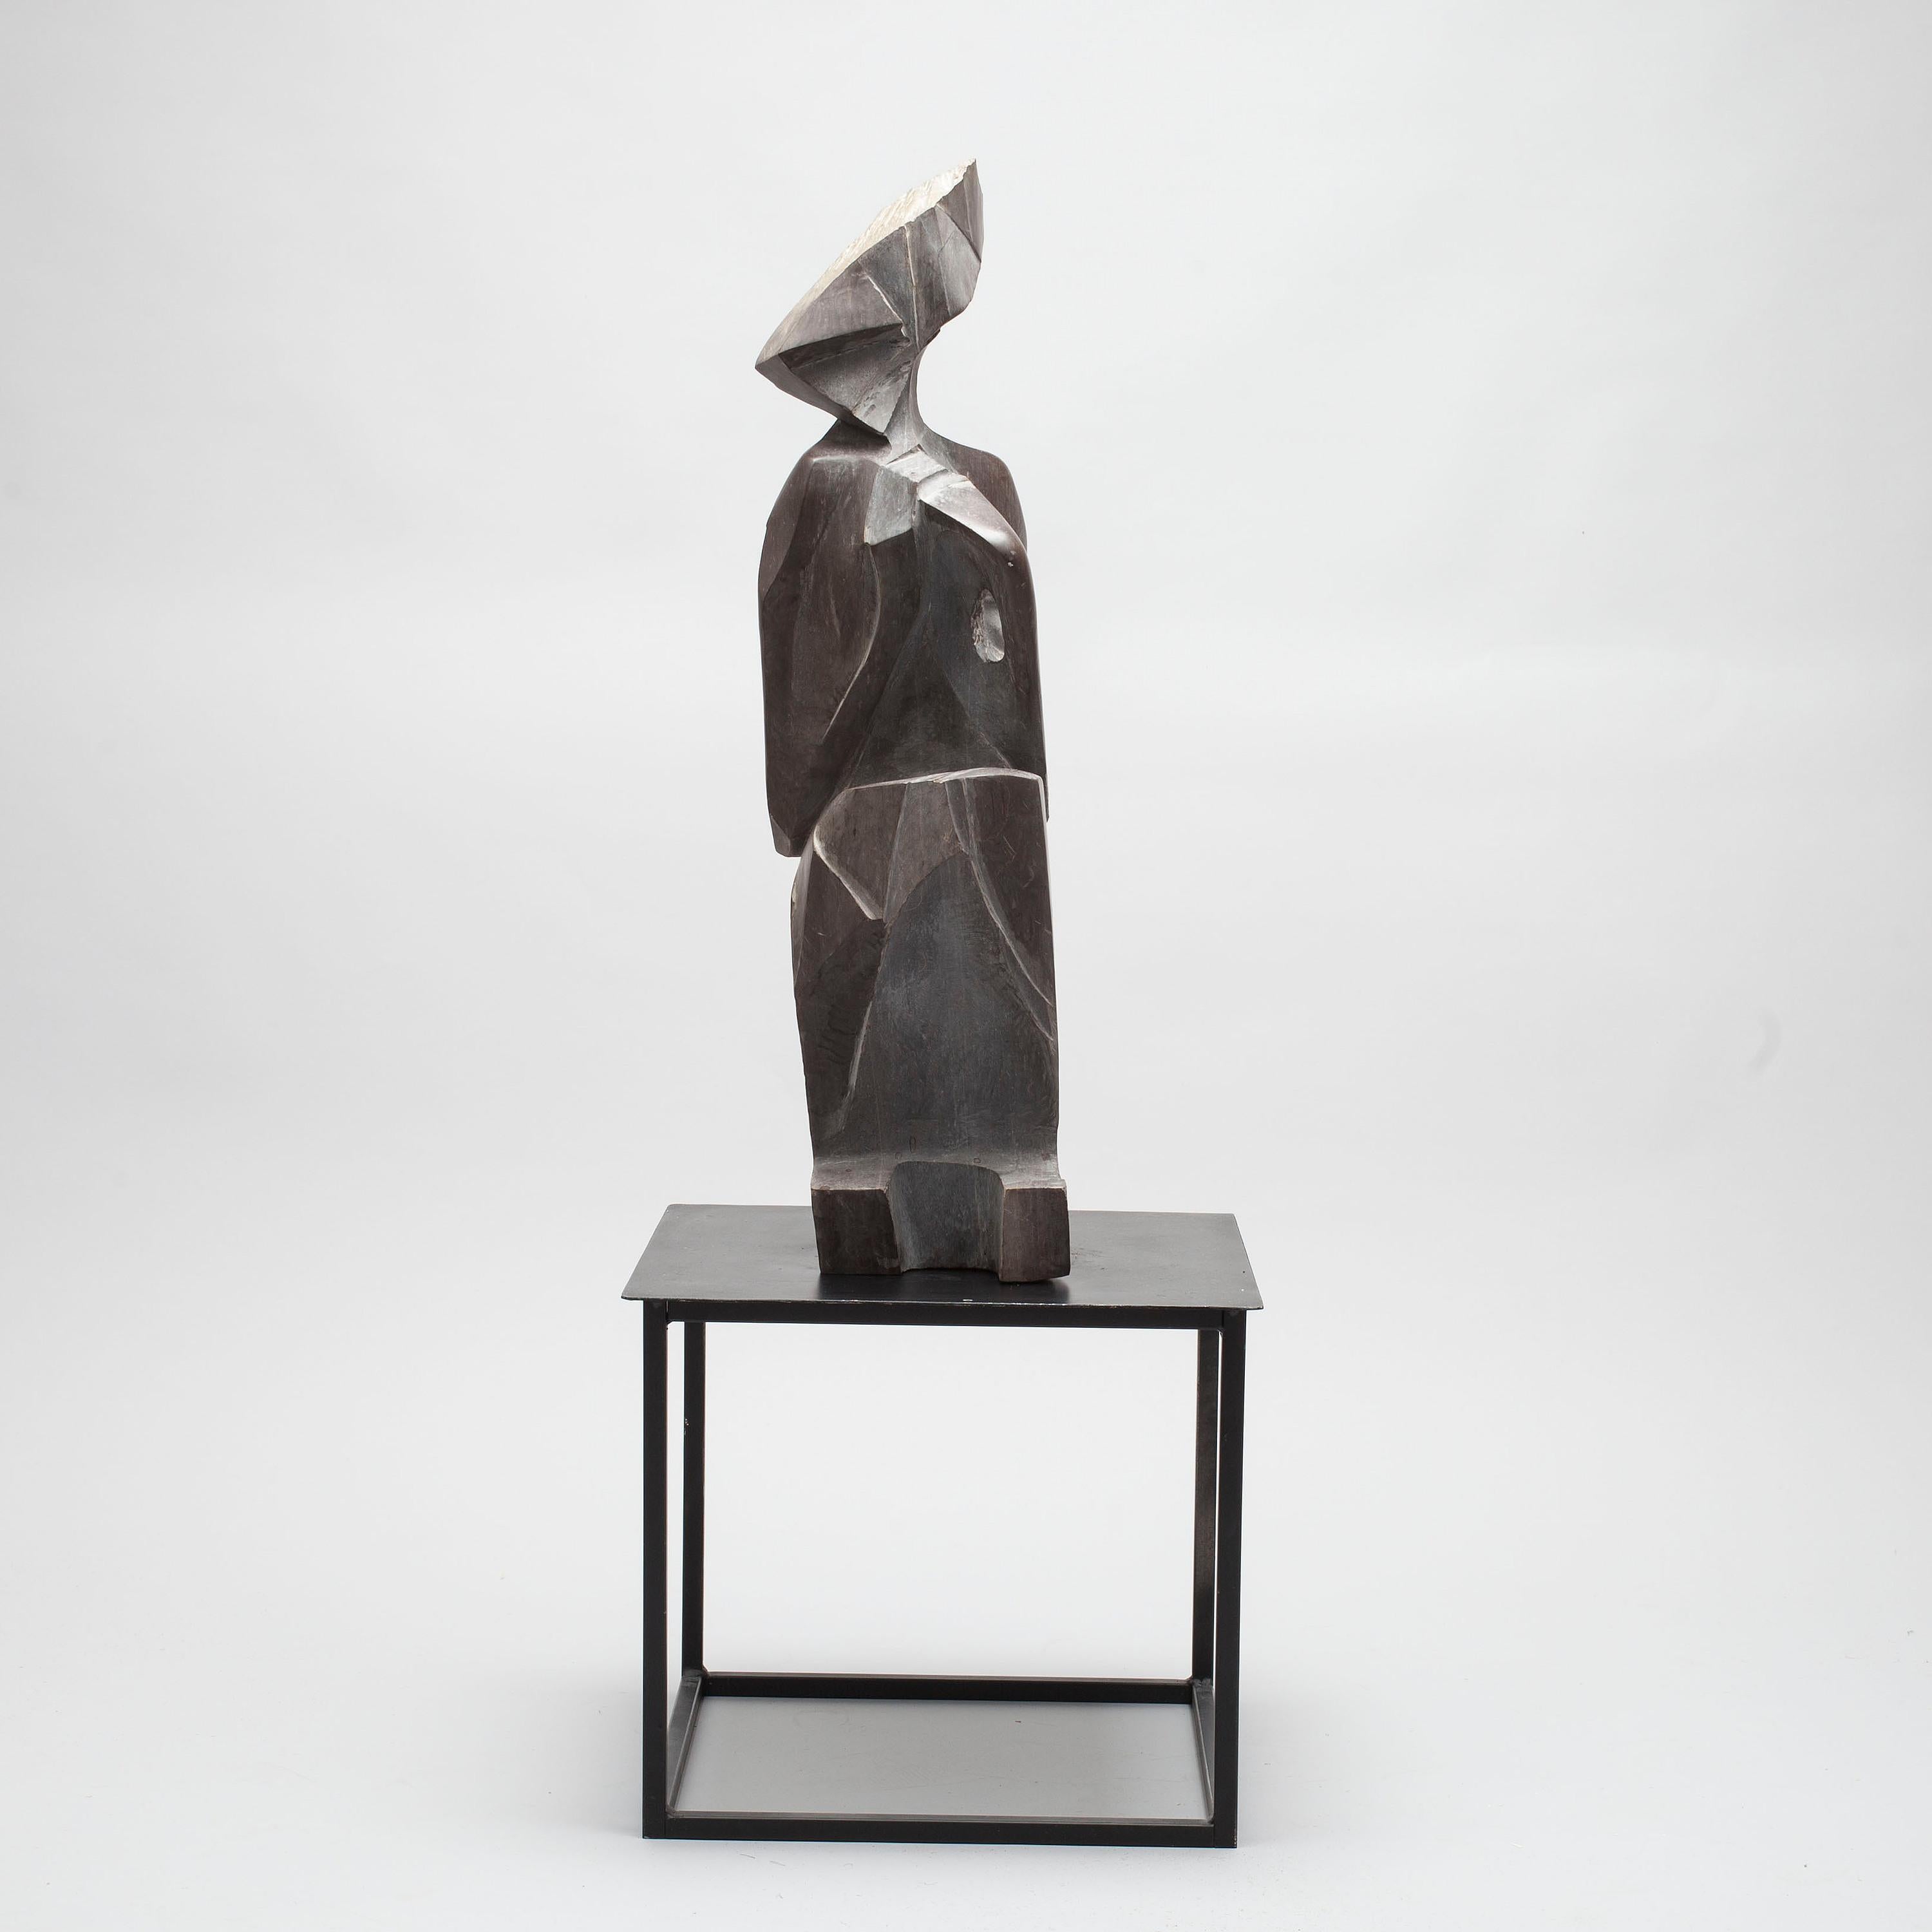 20th Century Tall Brown Stone Sculpture by Okayed Konstnar 1930 URSS Signed  For Sale